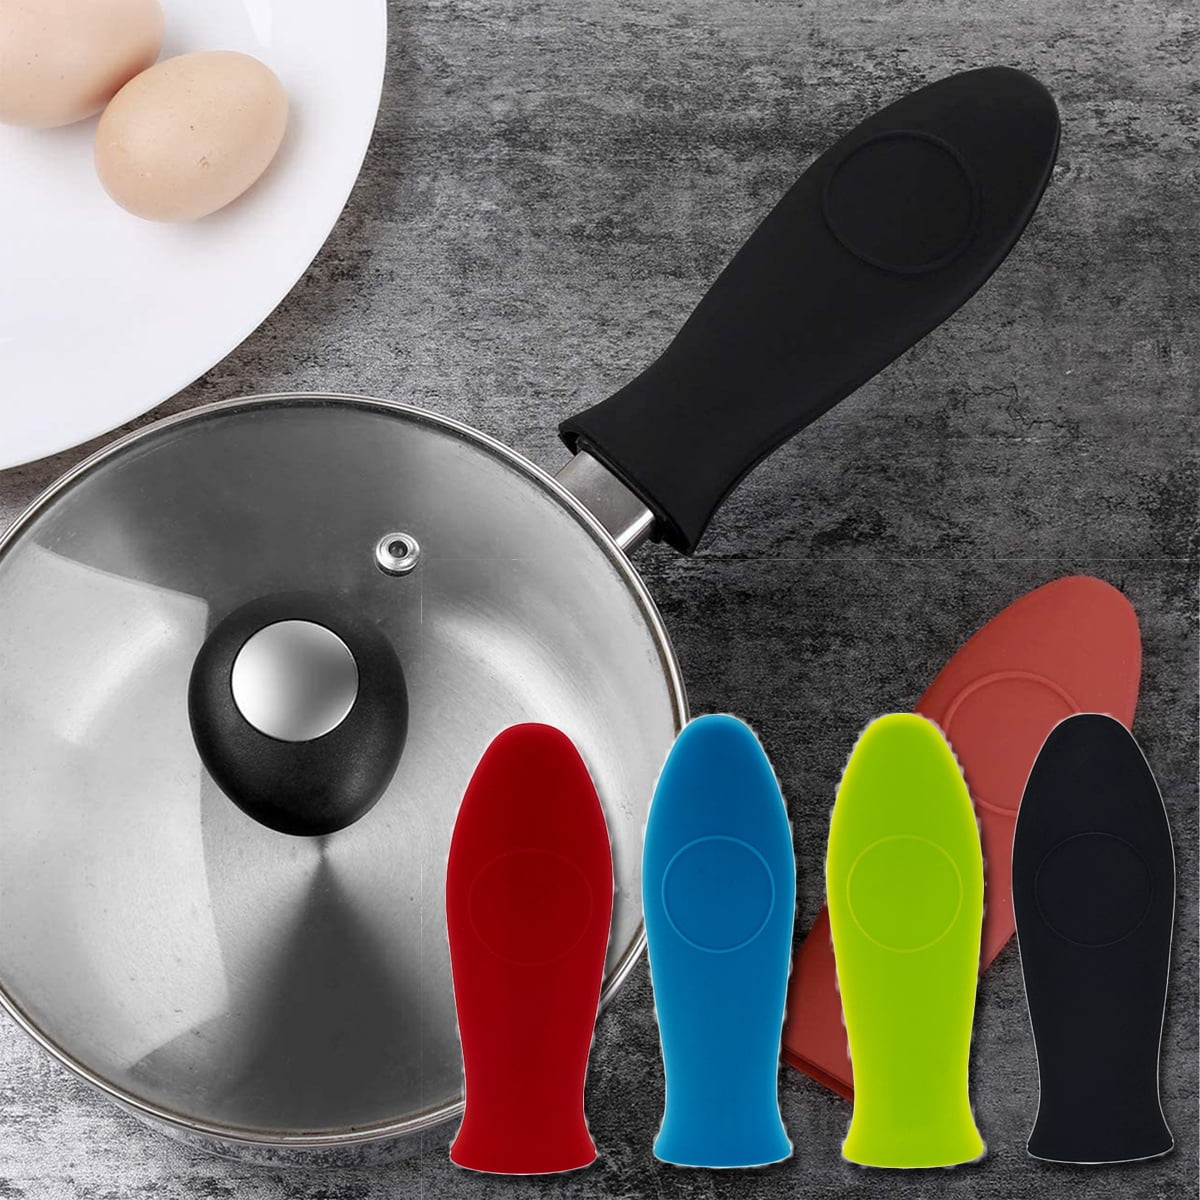 Webake Silicone Hot Handle Cover Holder Sleeve For Small Cast Iron